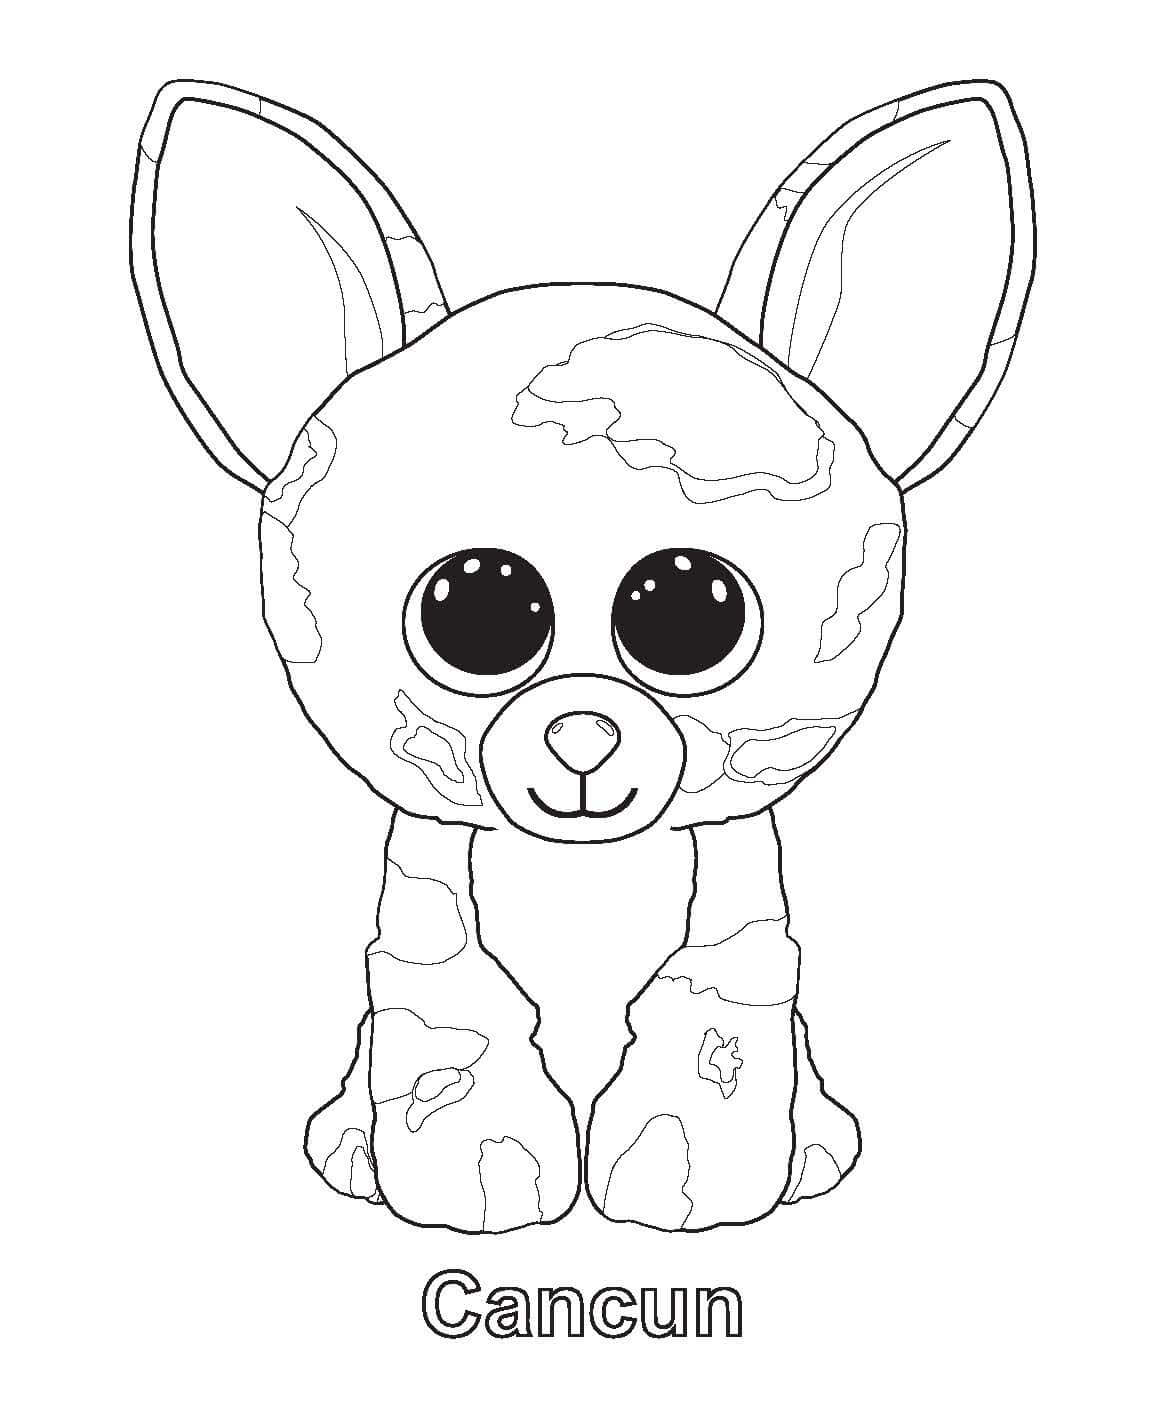 Cancun - Beanie Boo Coloring Pages